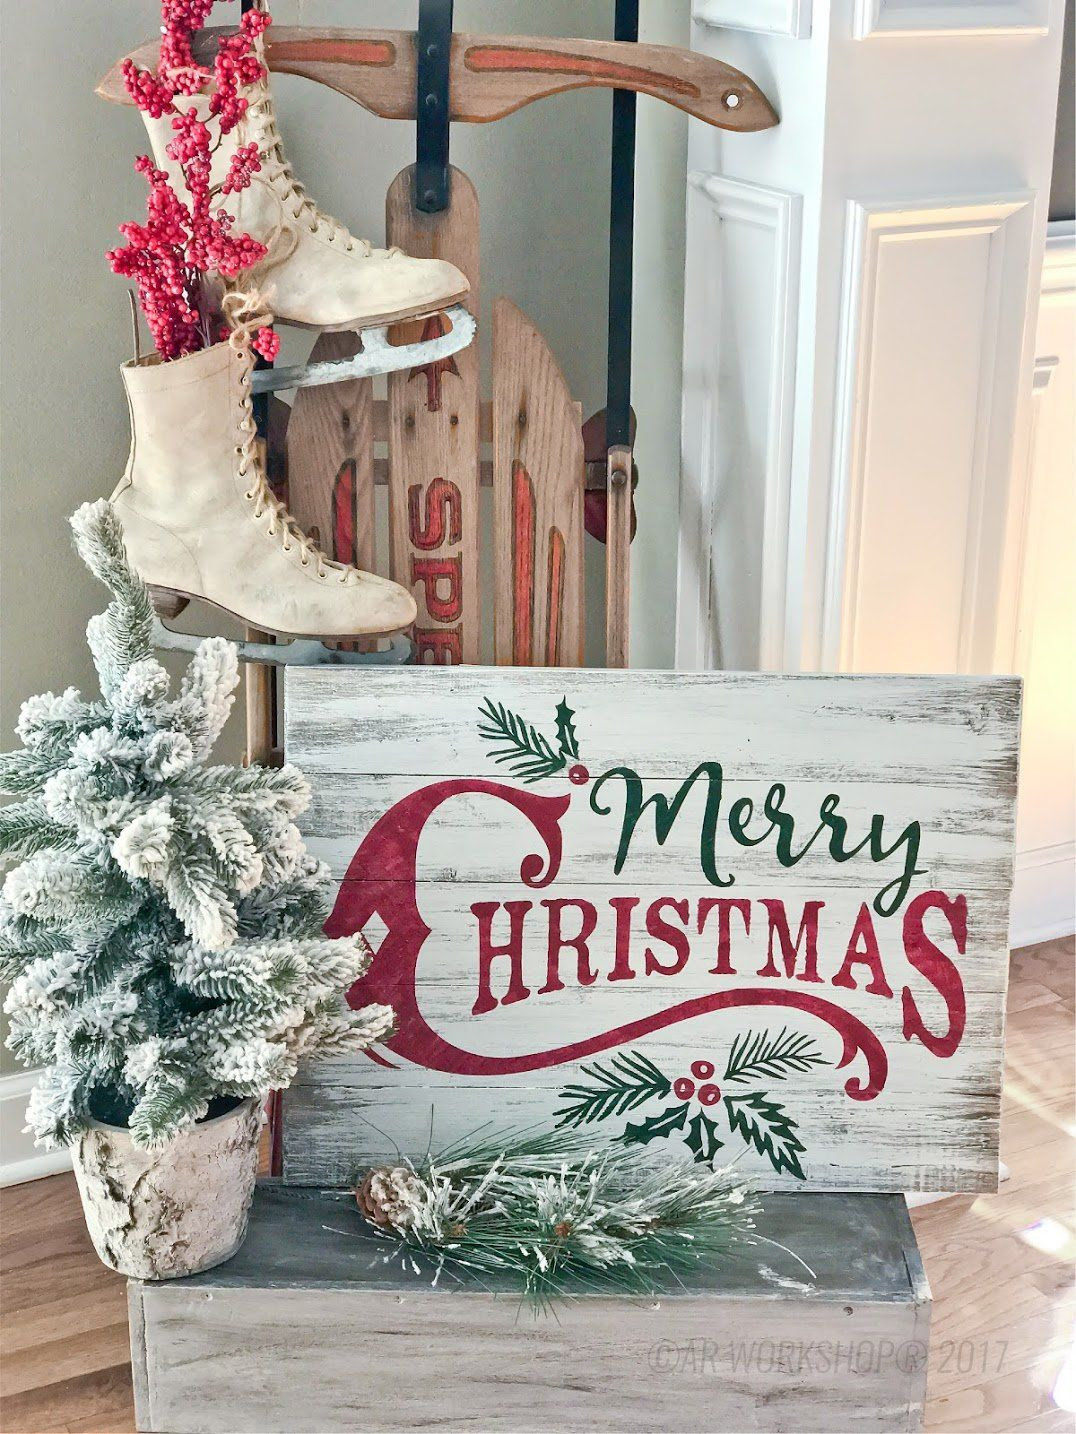 Christmas Signs DIY
 Plank Wood Signs and DIY Wood Projects – AR Workshop